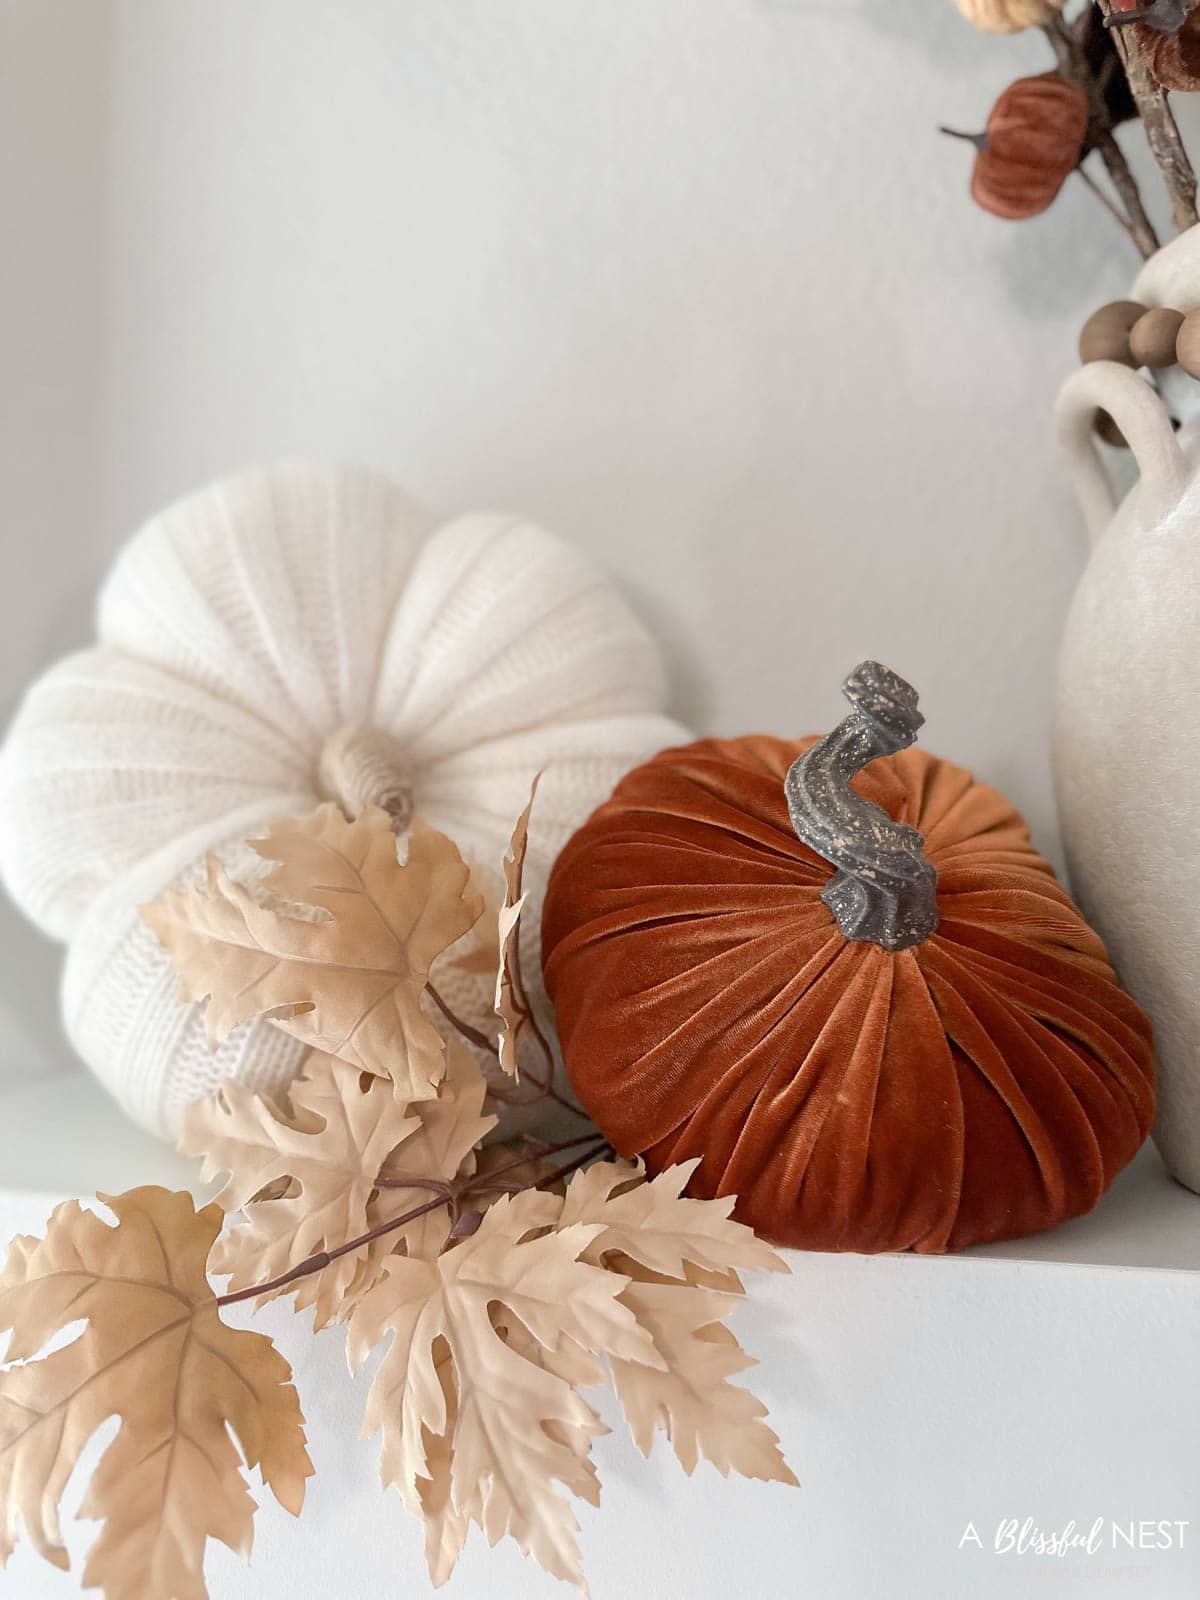 Orange velvet pumpkin clustered next to a cream knit pumpkin with fall leafs tucked into them.